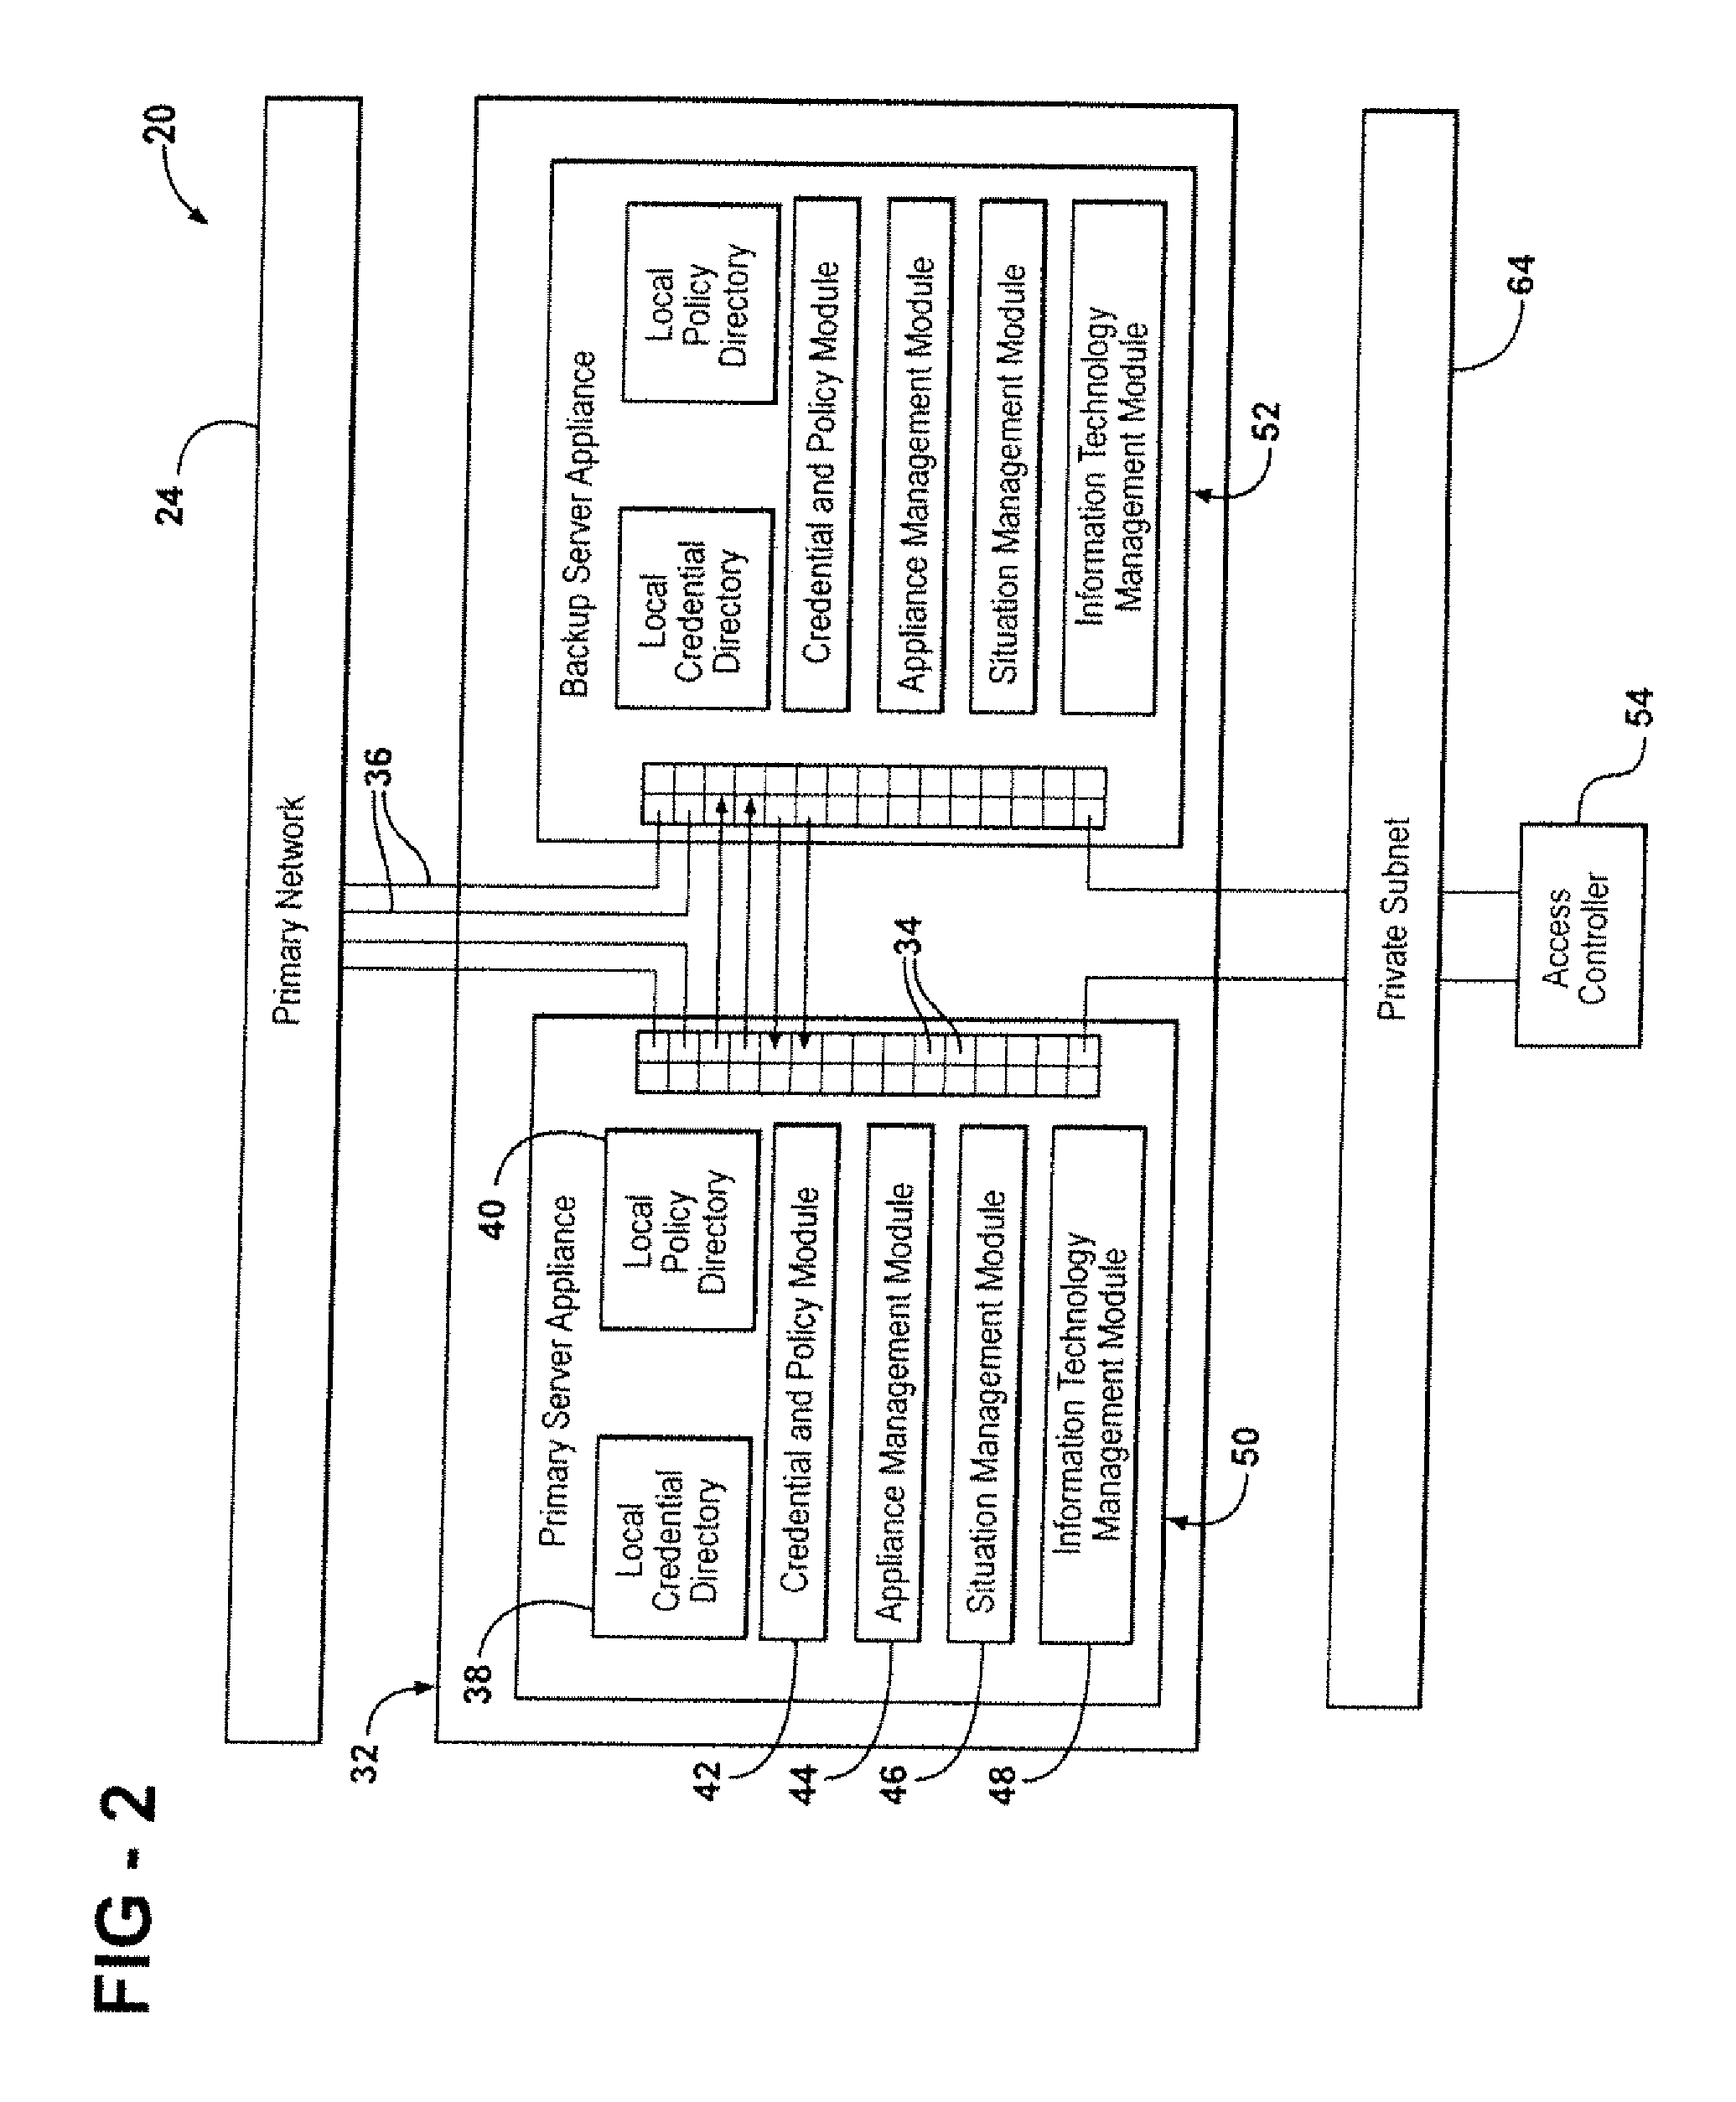 Networked physical security access control system and method